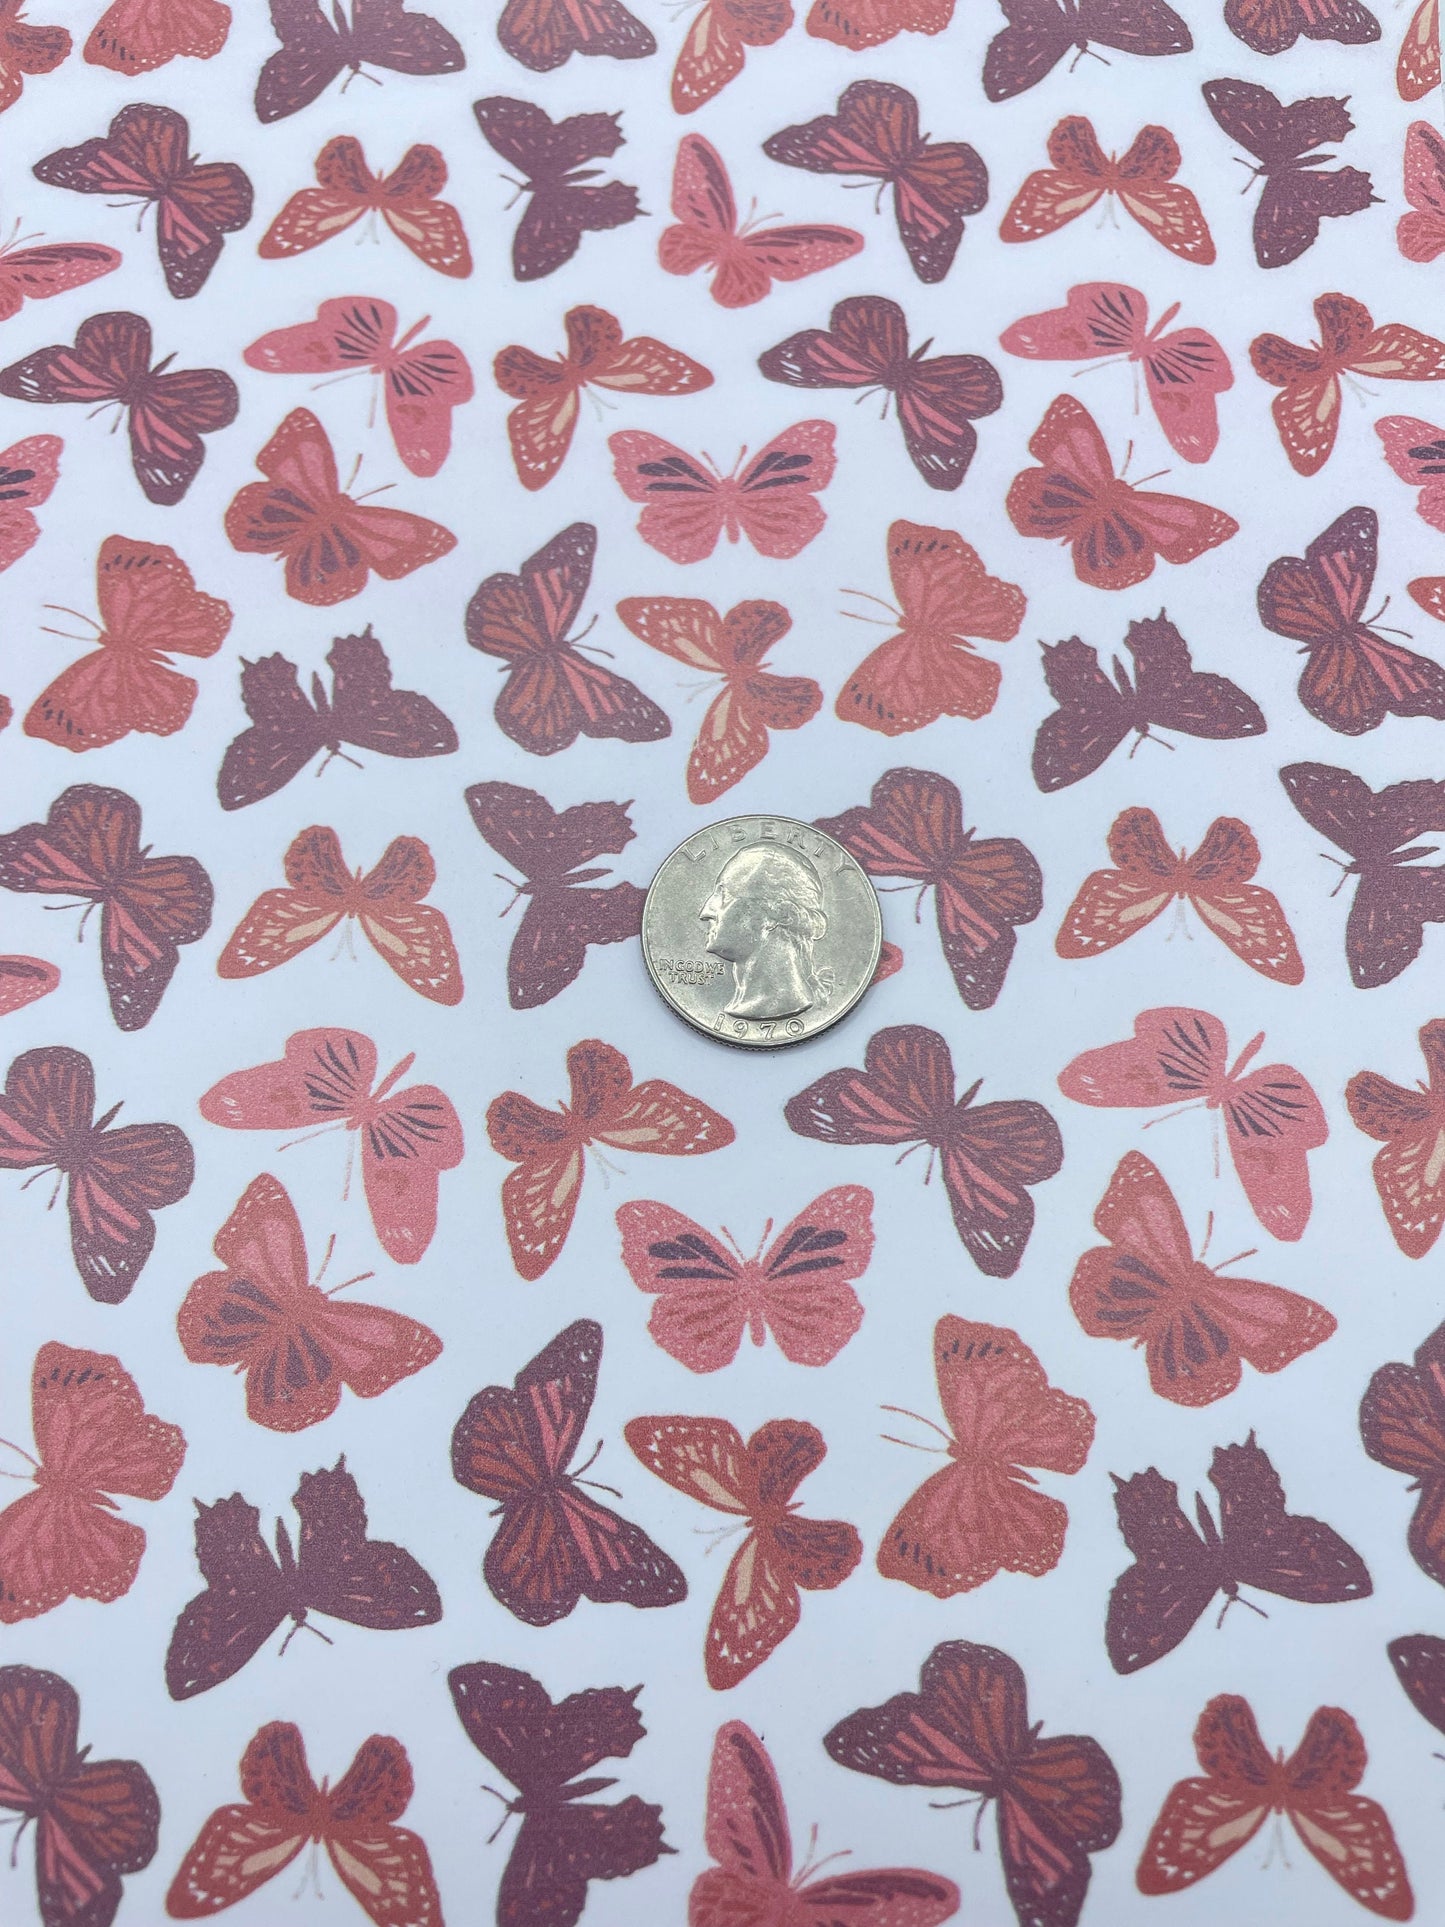 Orange Butterflies Boho Print smooth faux leather sheets great for bows and earrings TheFabricDude